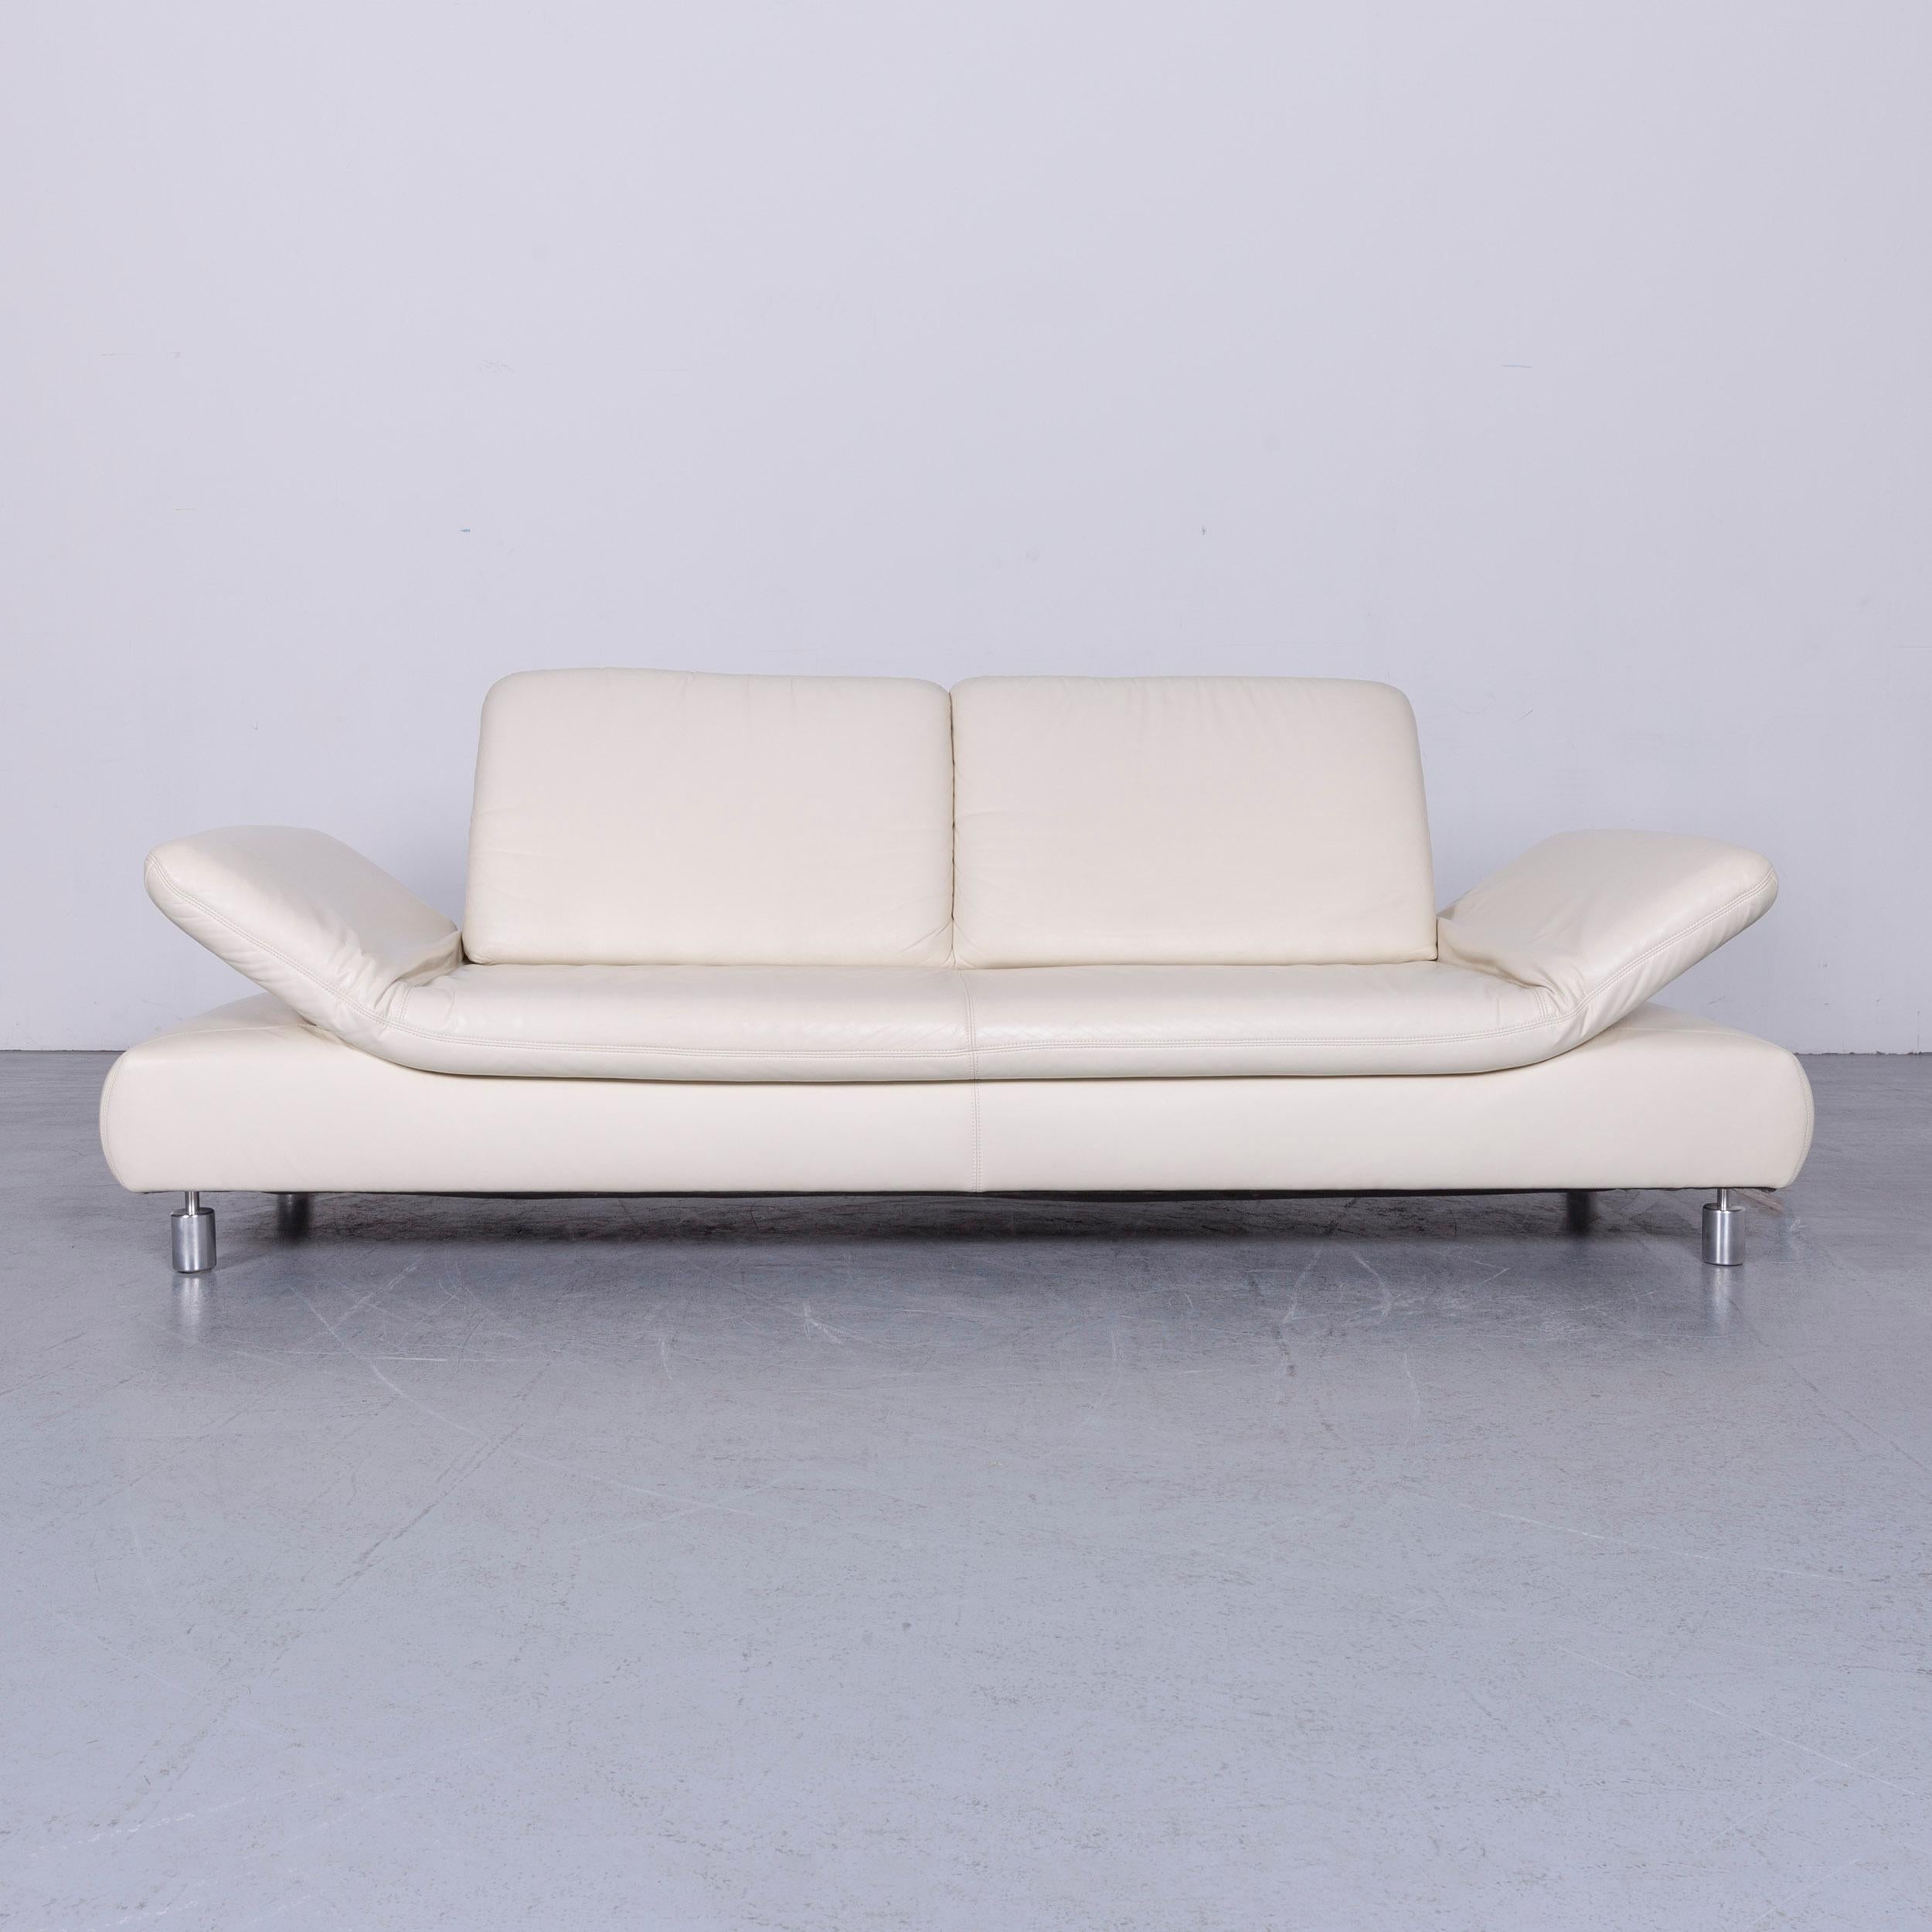 We bring to you an Koinor Rivoli designer leather three-seat sofa in white with functions.















